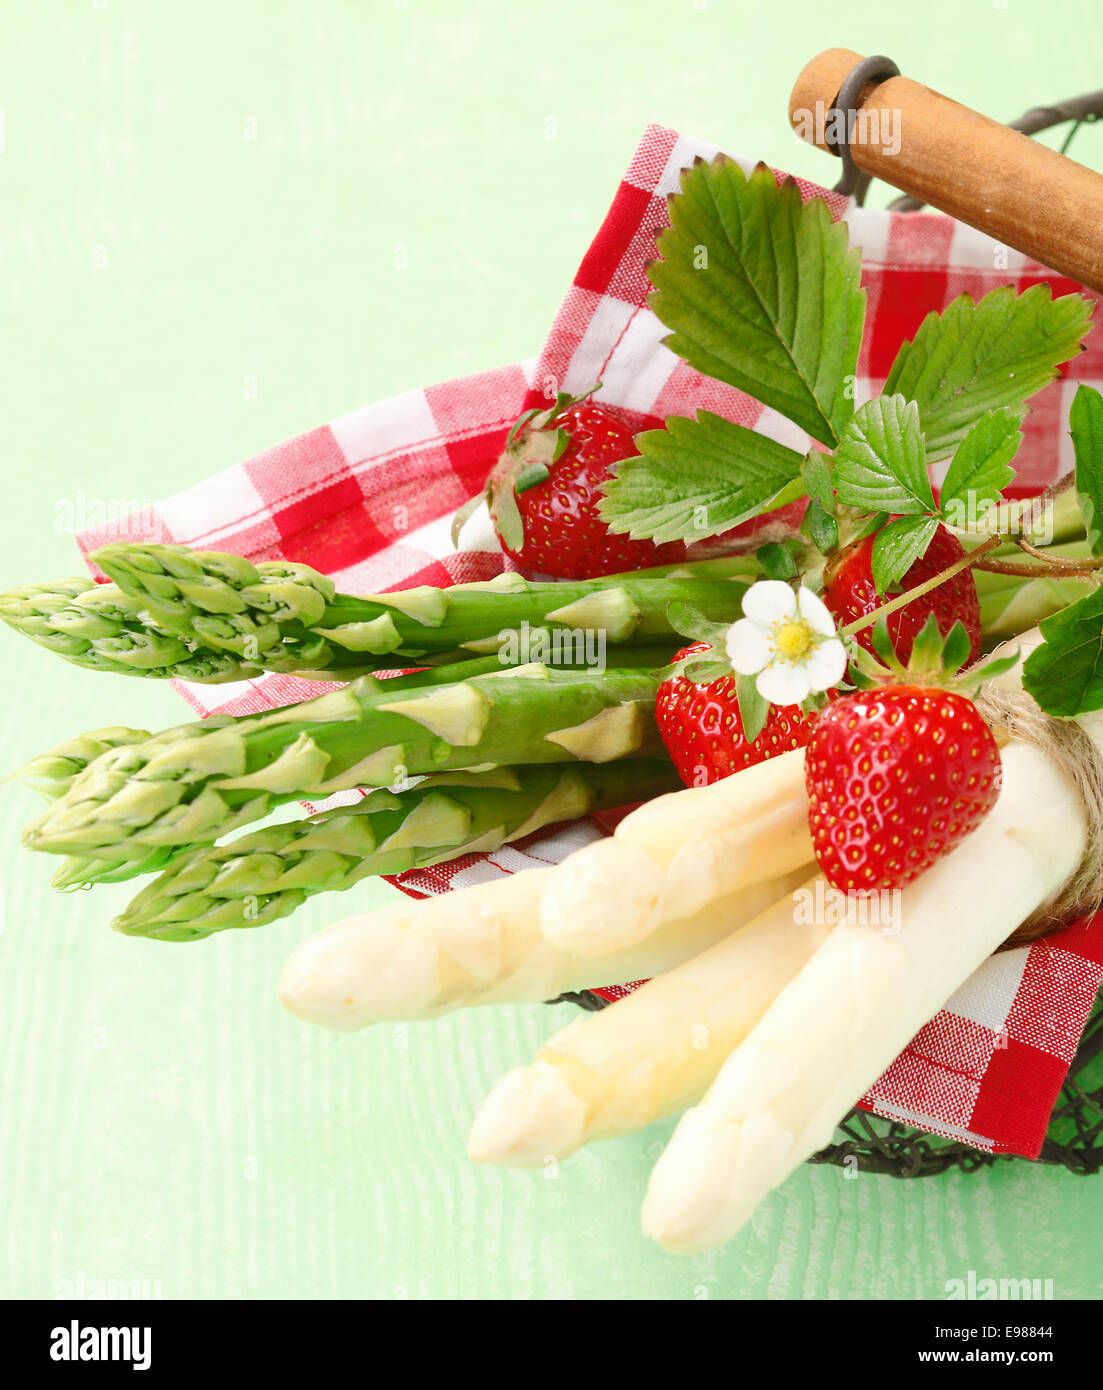 Serving of fresh green and white asparagus tips on a cheerful red and white checked napkin with strawberries Stock Photo